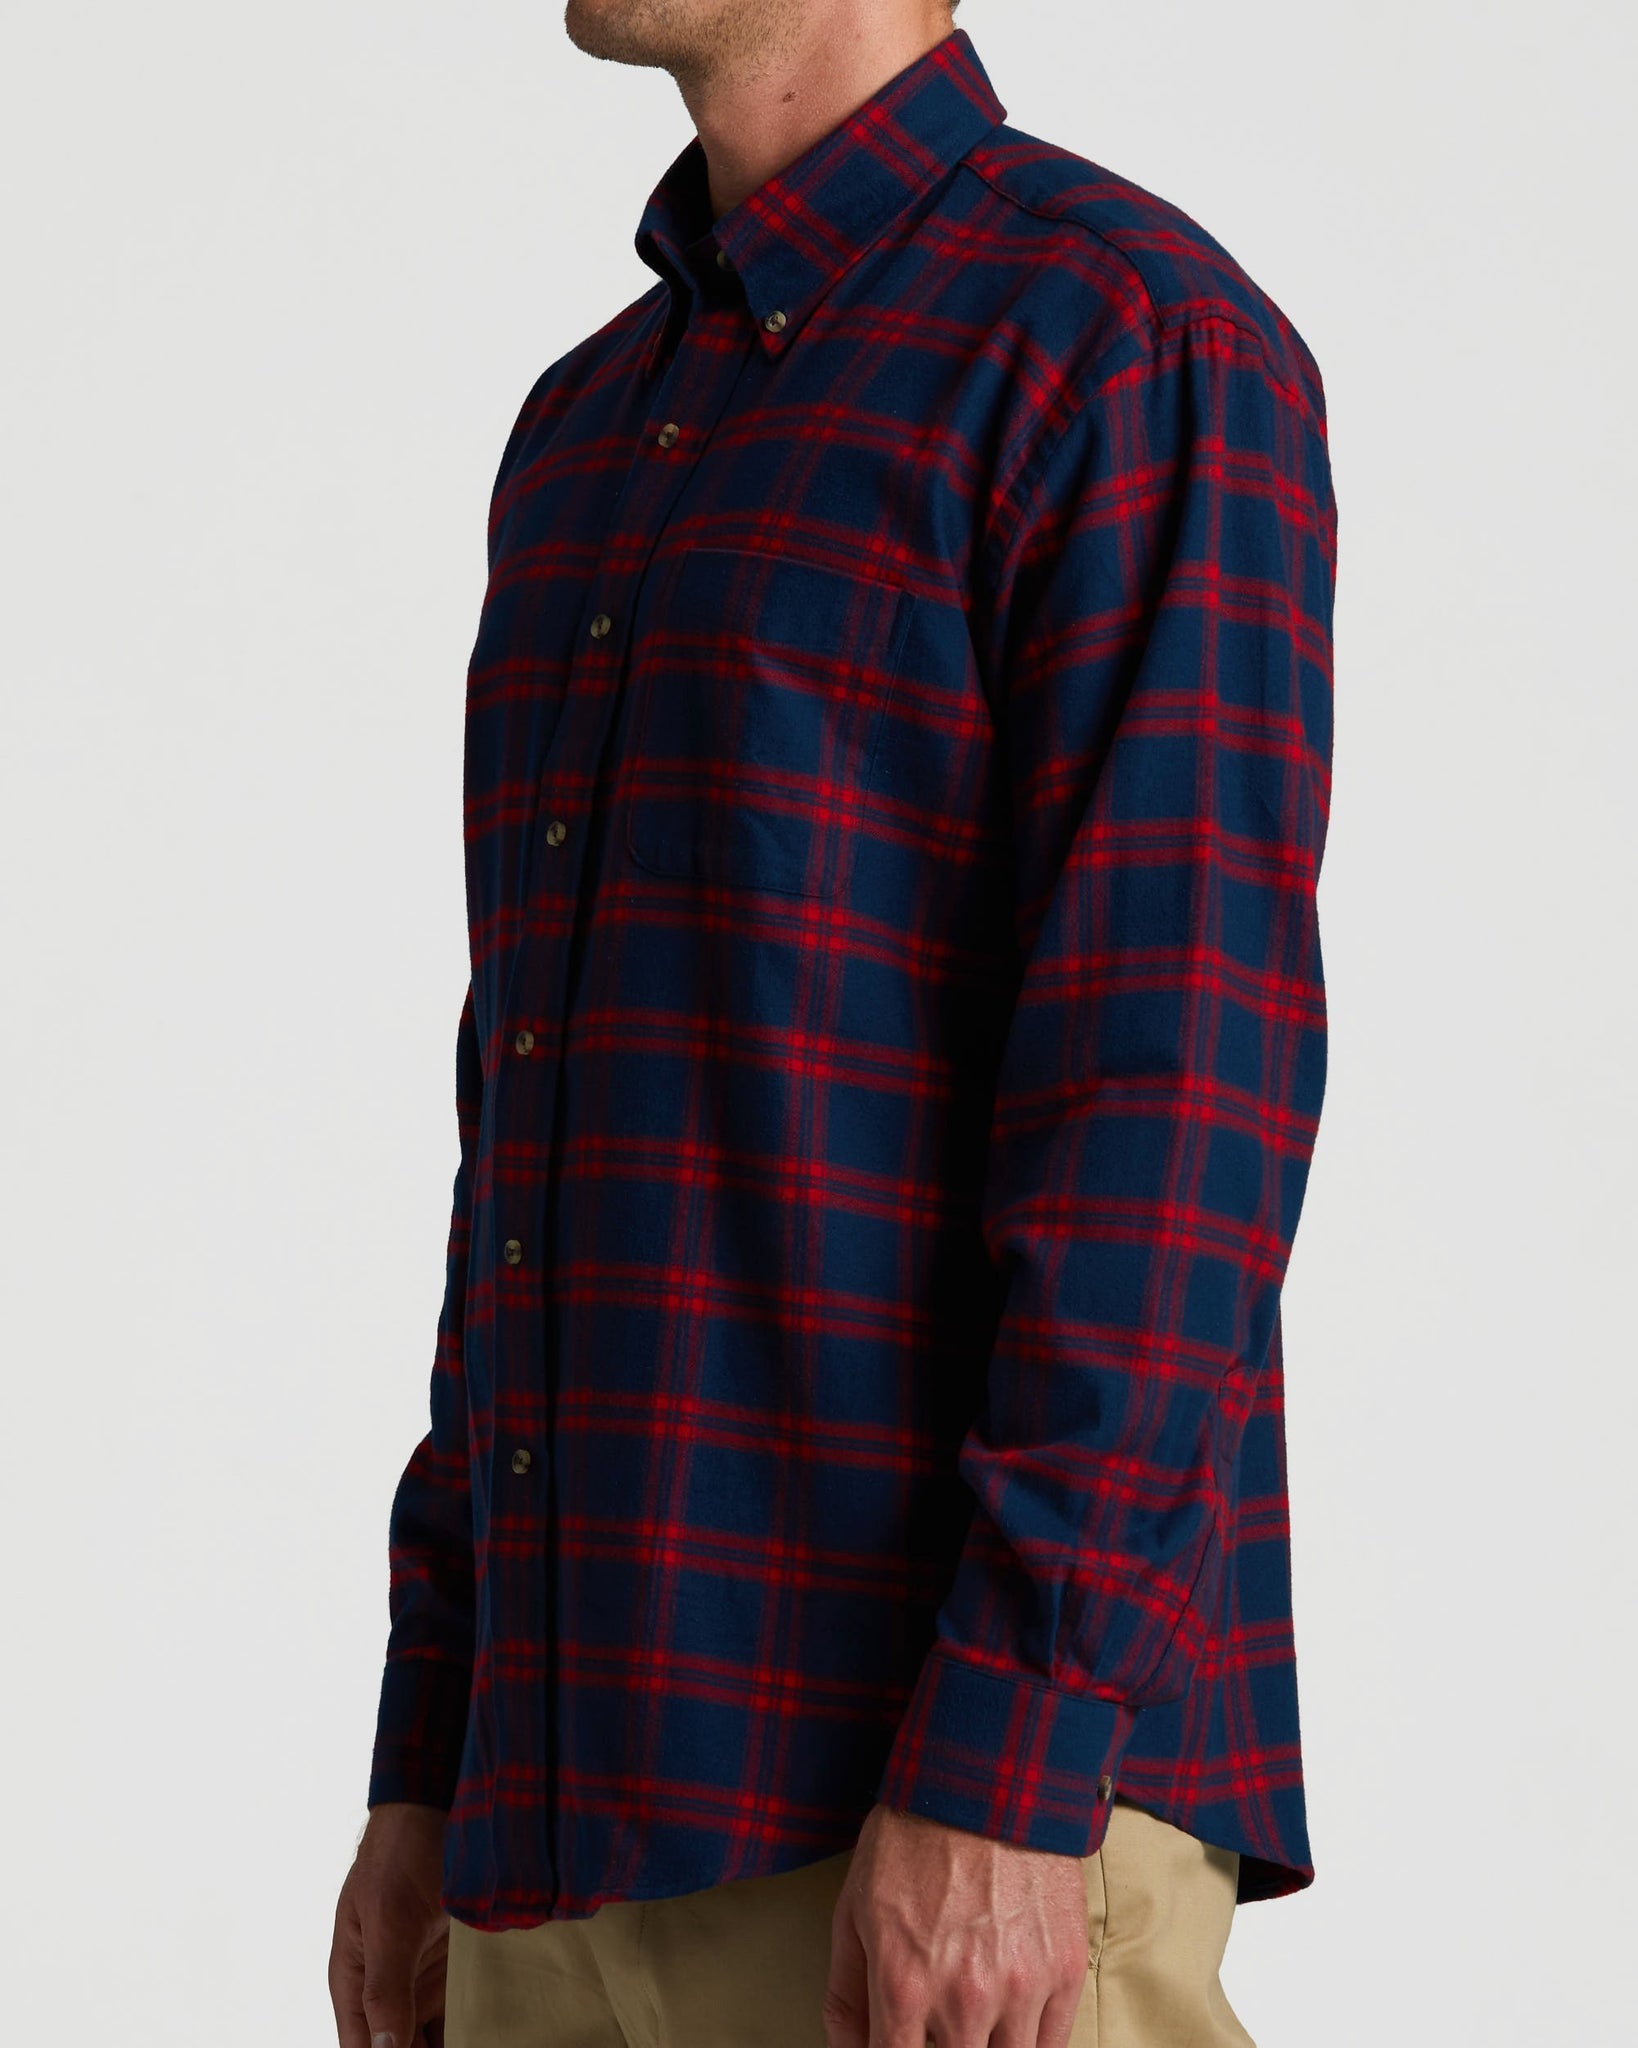 https://cdn.shopify.com/s/files/1/0249/6141/7252/files/Magna_Ready_-_Mens_-_Flannel_-_Blue_Red-fade.mp4?4372